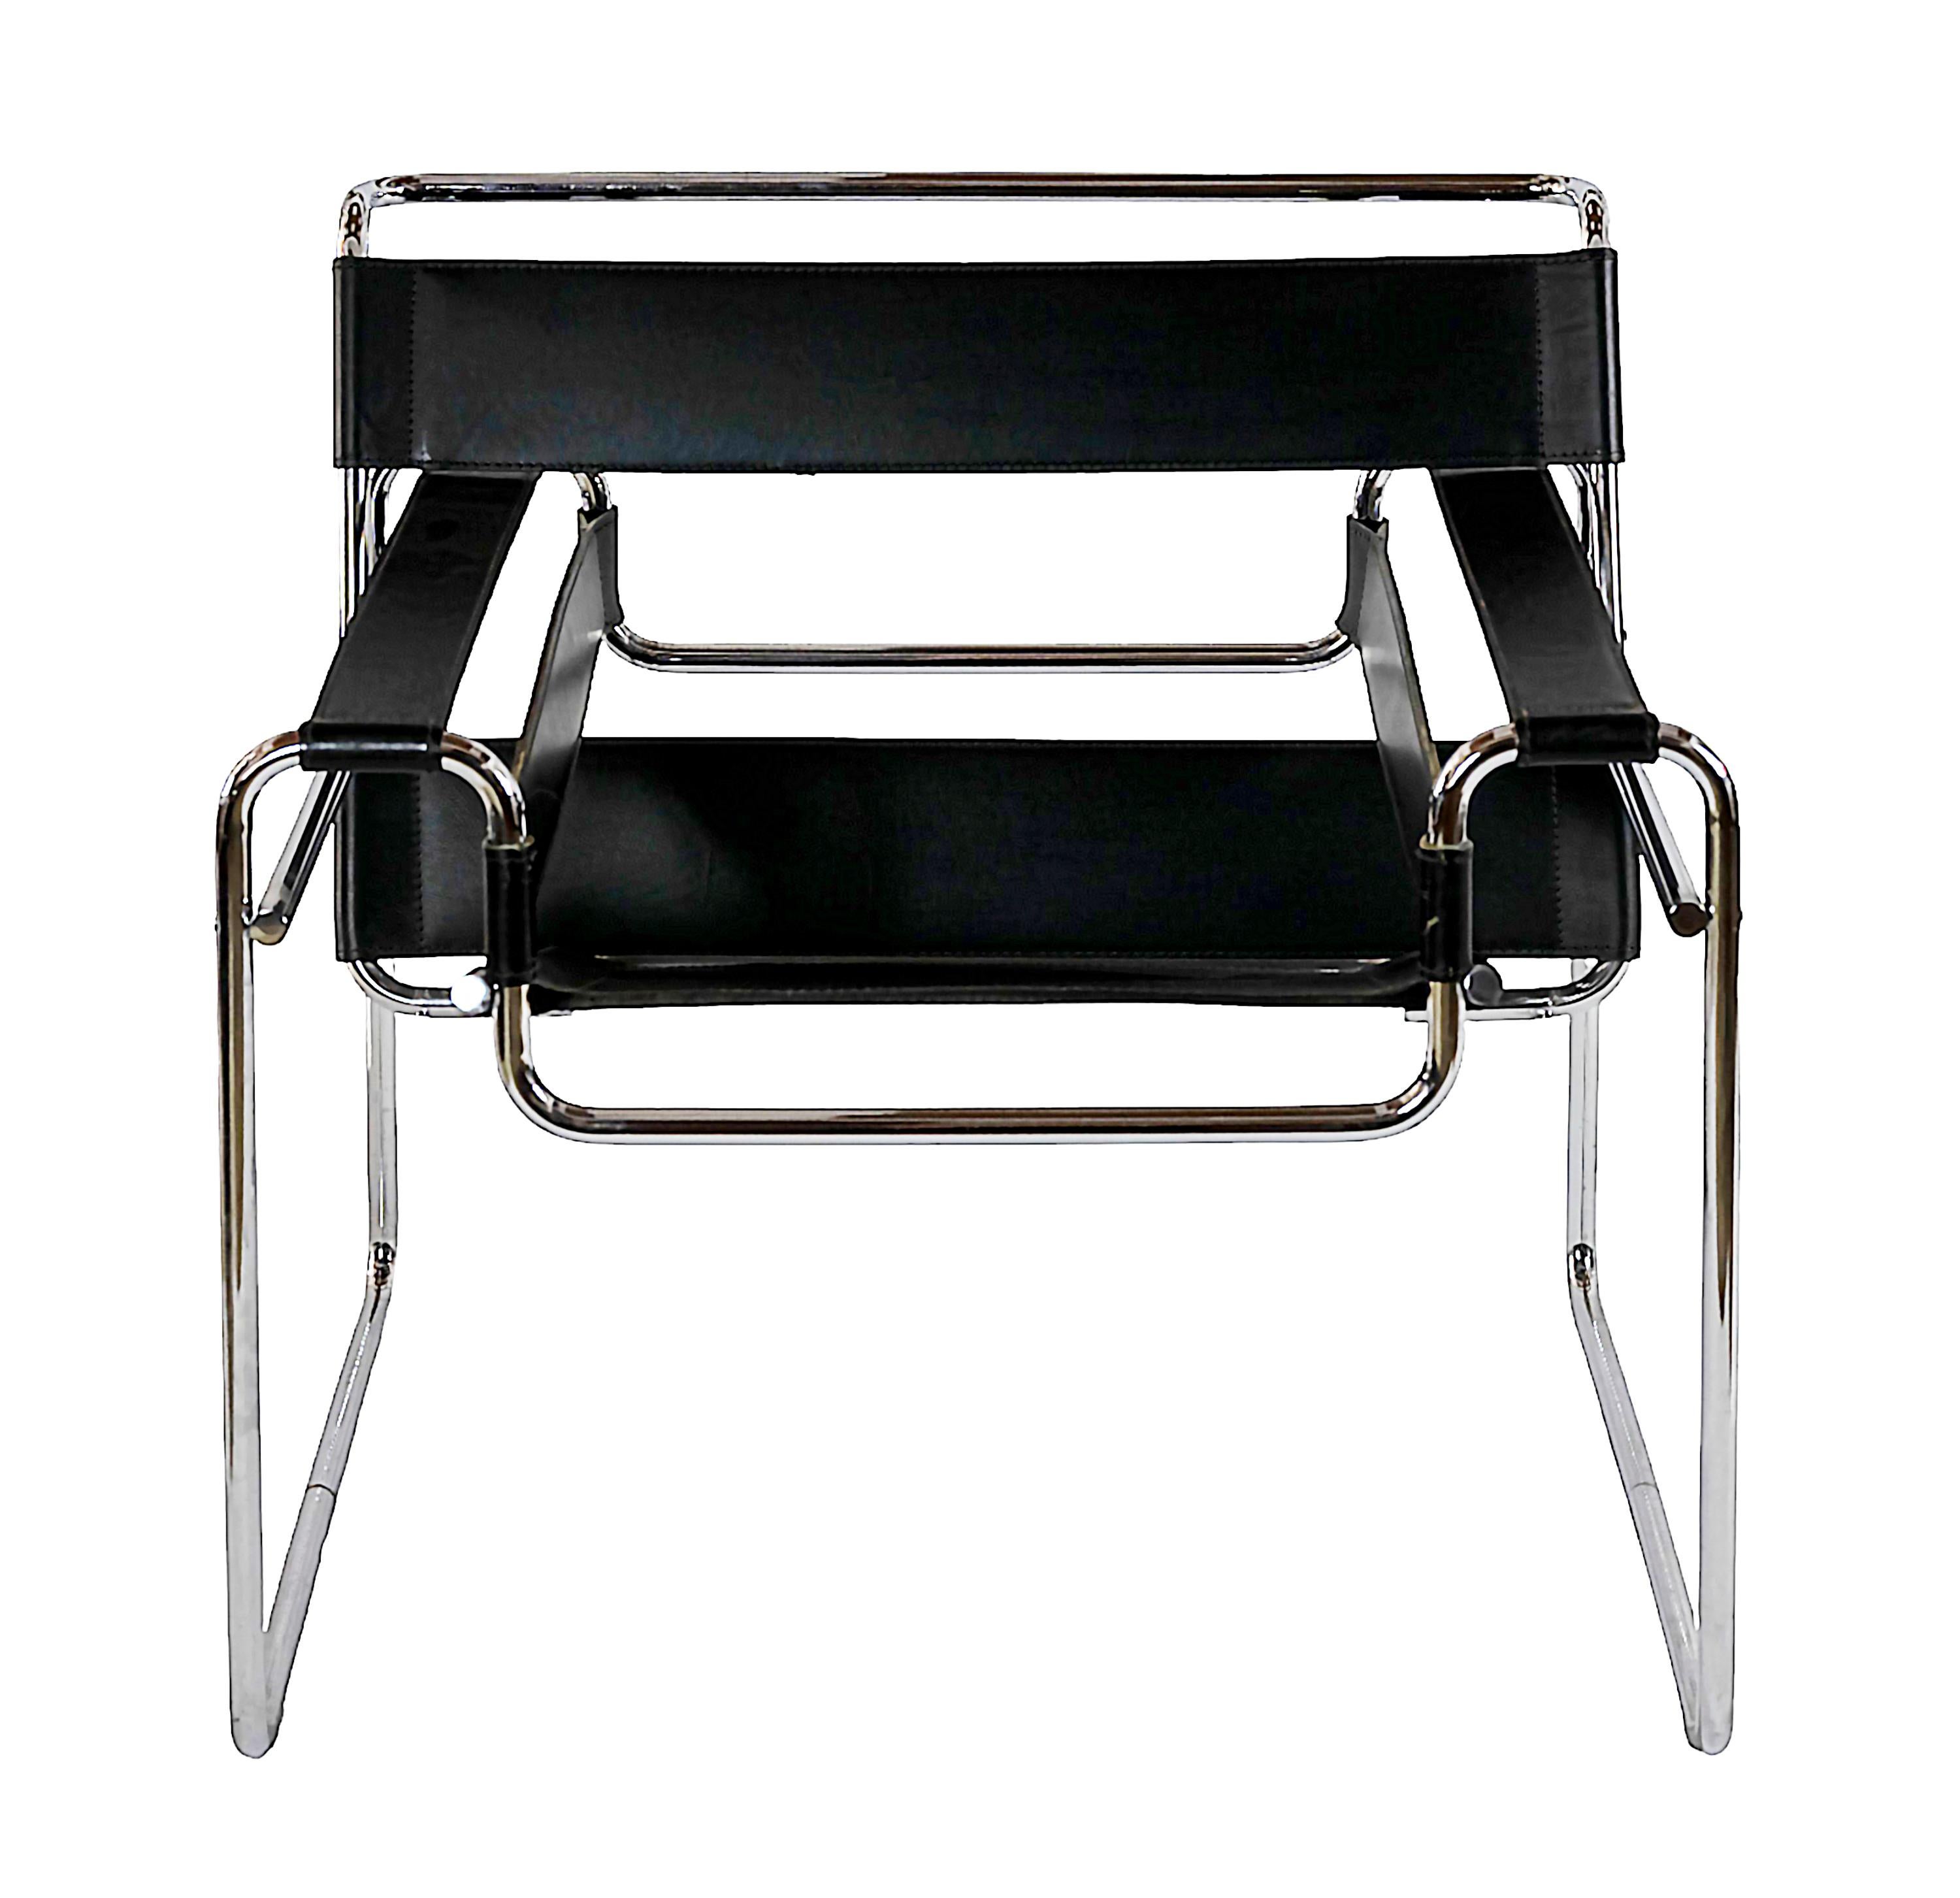 Vintage Wassily lounge chair, designed by Marcel Breuer, circa 1925.
Manufacture date 2003 by Knoll Studio.
Stamped Knoll Studio on the frame and labeled.
In black leather, chromed steel tube frame.
Good vintage condition. Some scratched on the seat